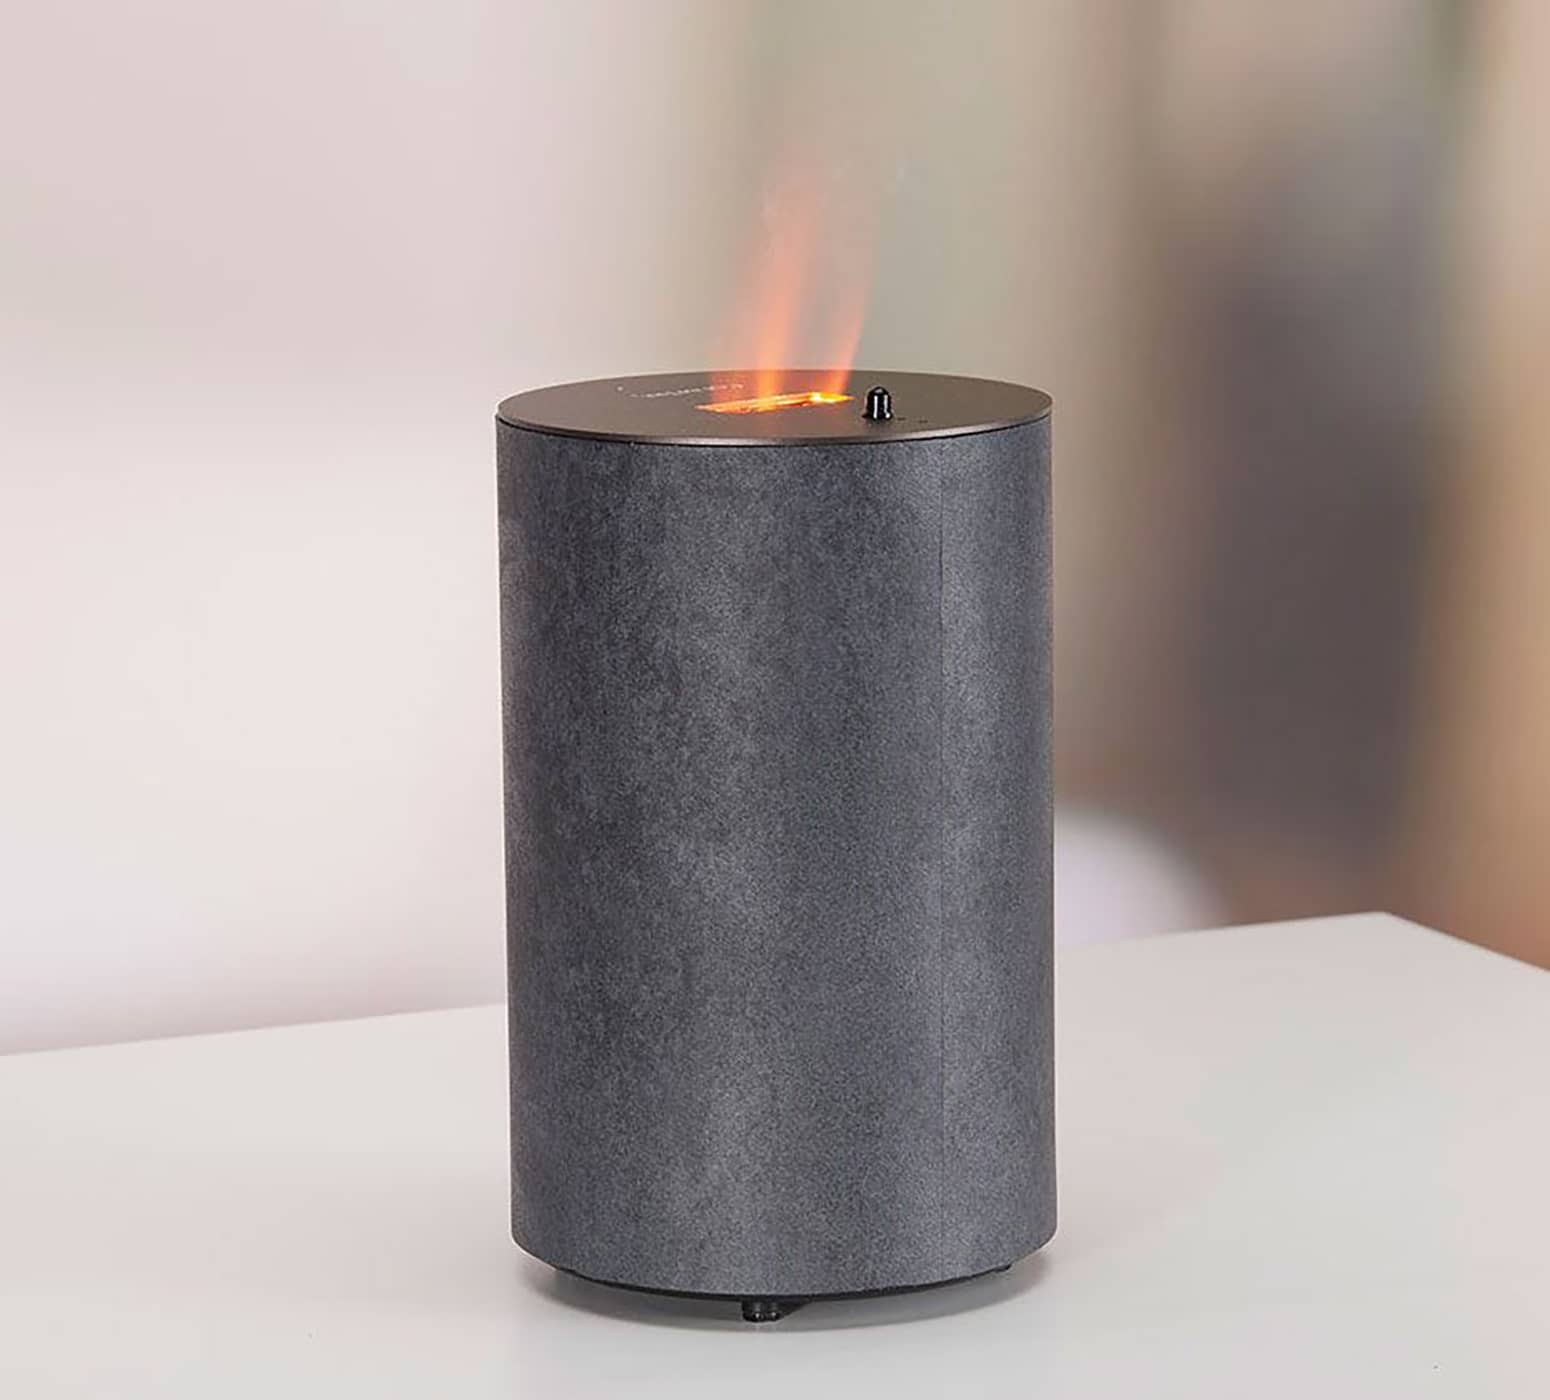 ColdFire - Faux Tabletop Fireplace / Essential Oil Diffuser